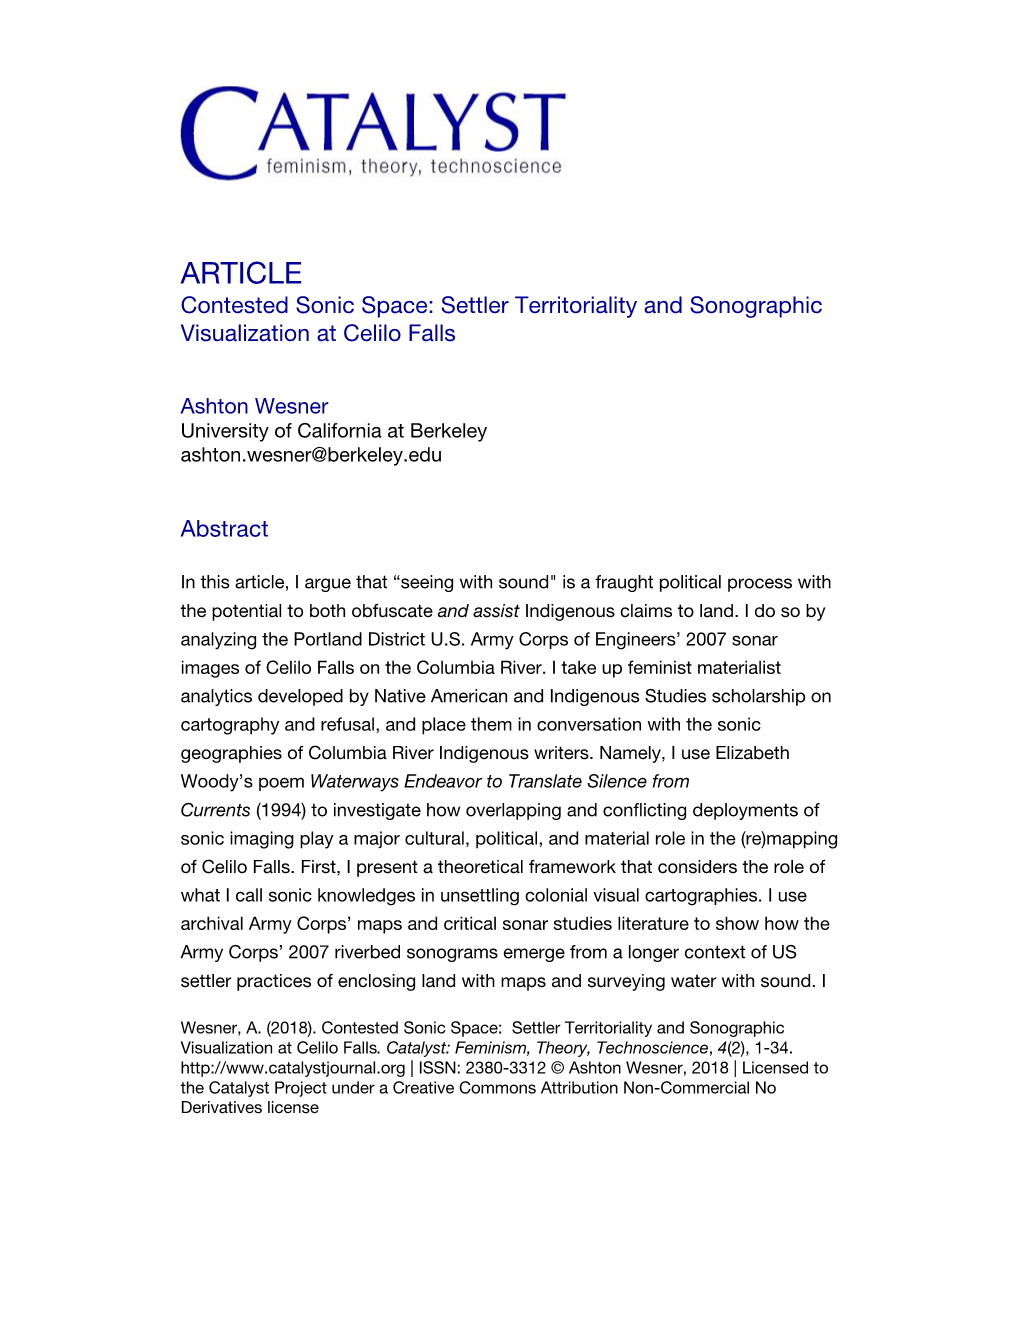 ARTICLE Contested Sonic Space: Settler Territoriality and Sonographic Visualization at Celilo Falls